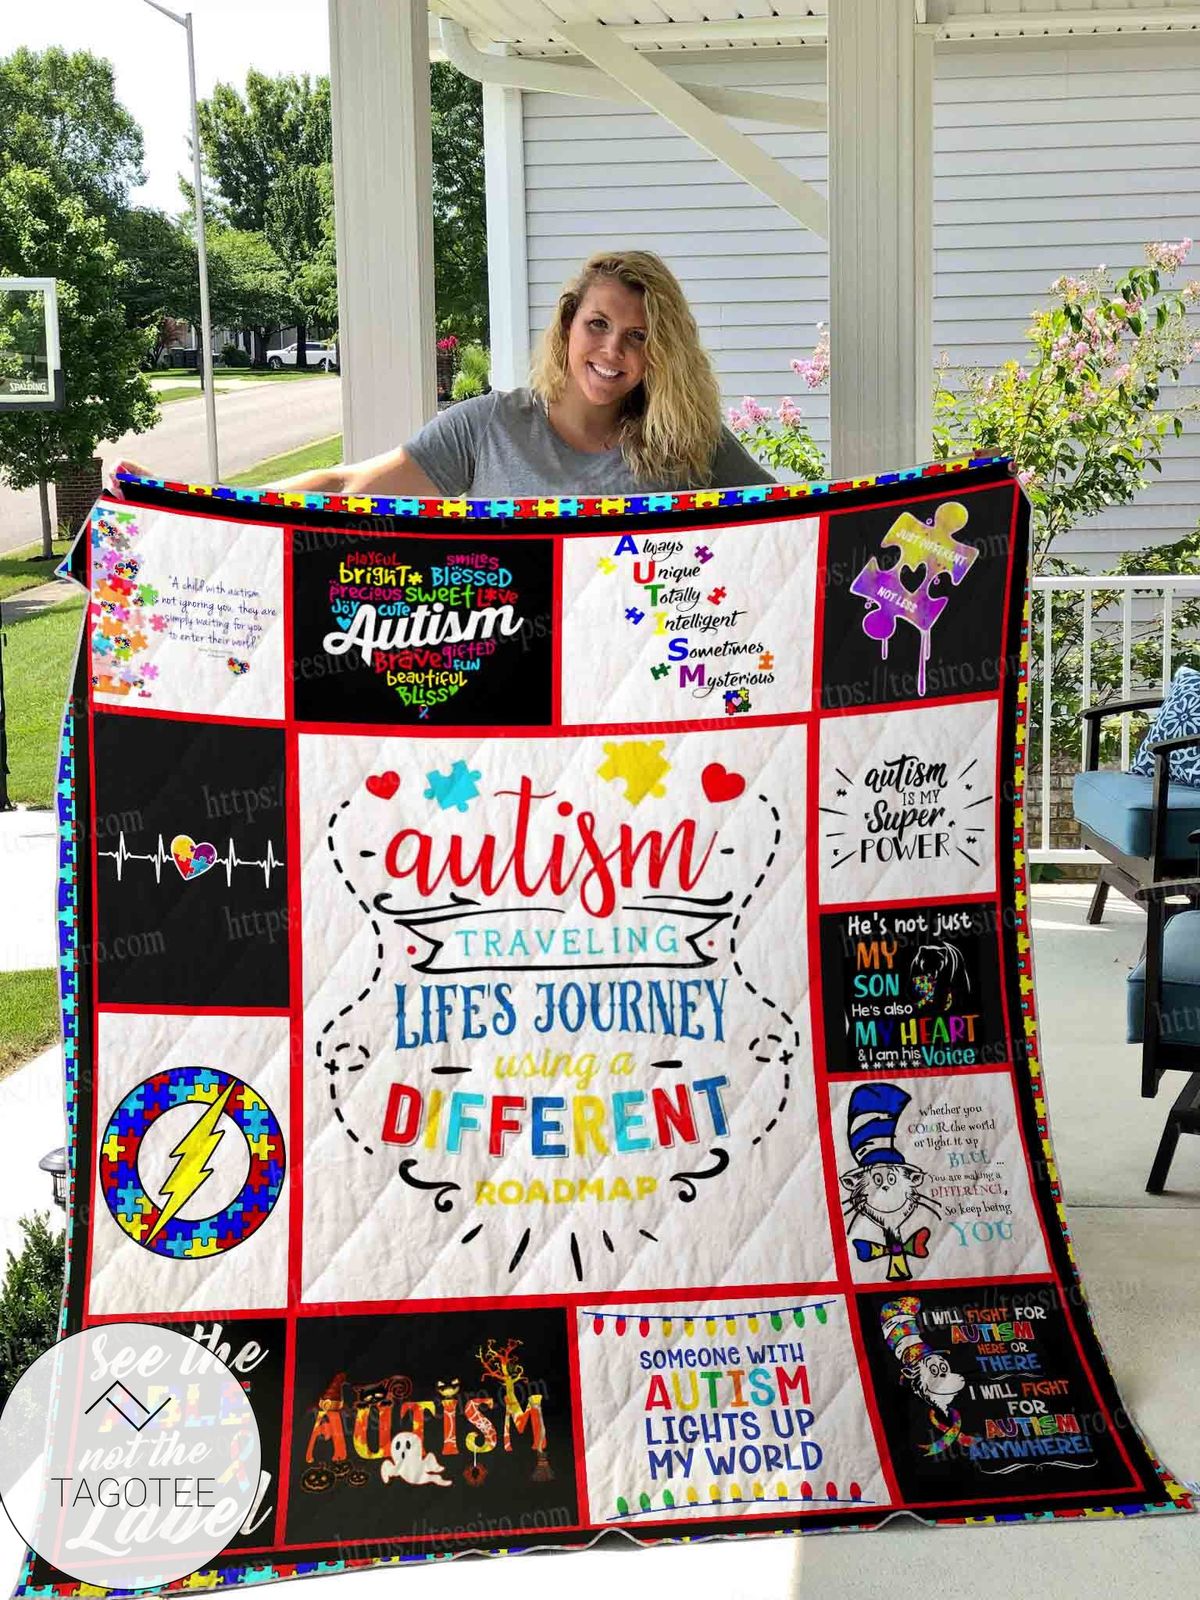 Autism Traveling Life's Journey Using A Different Road Map Quilt Blanket